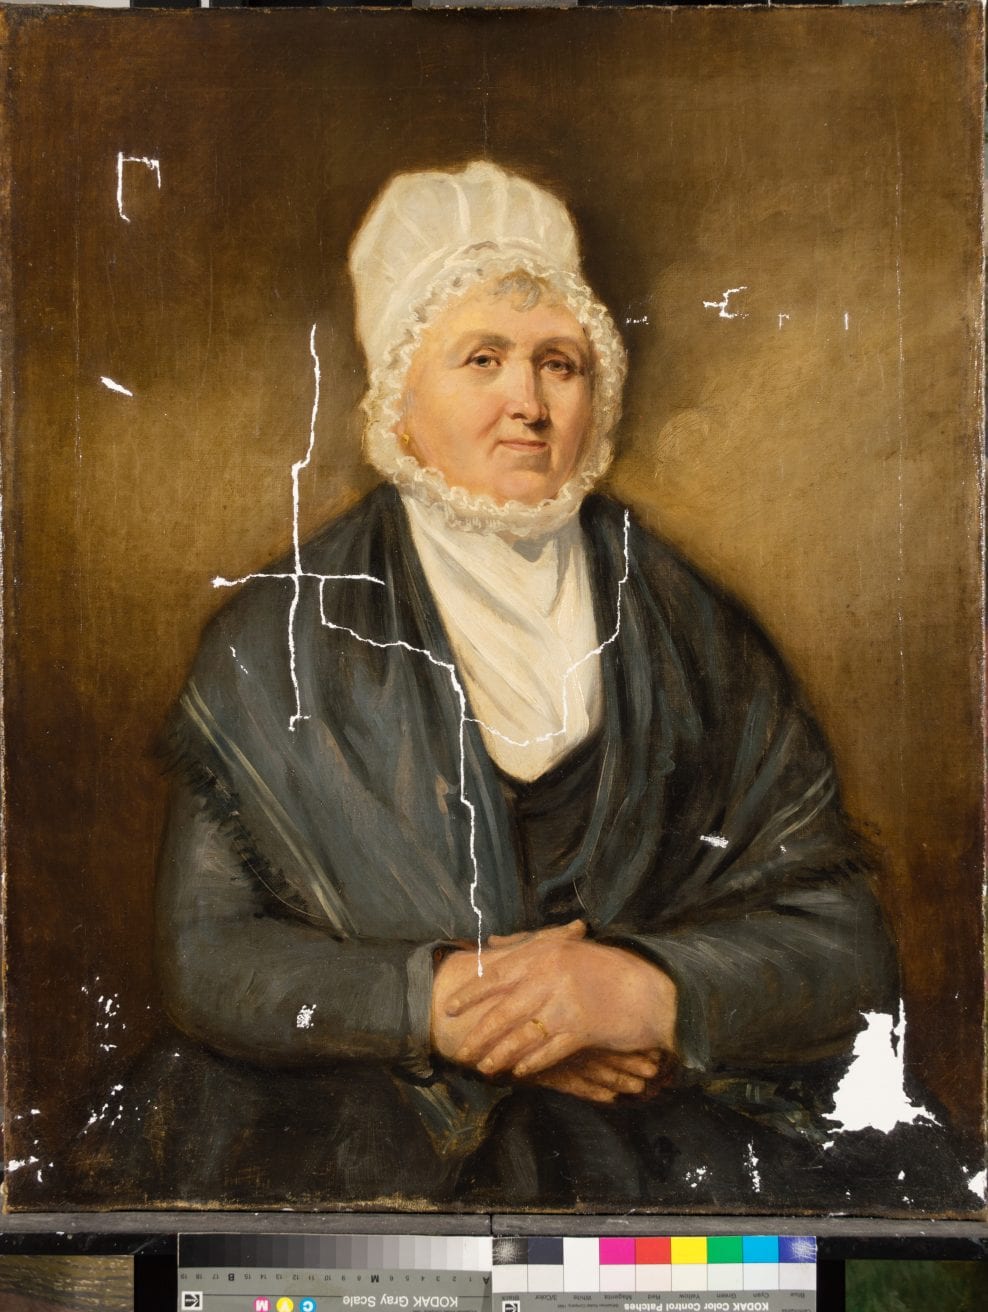 ‘The Dock Master’s Wife’ by unknown artist (c. 1870) from the Hull Maritime Musem. Oil on canvas. Conservation was carried out in 2019 and was funded by the National Lottery Heritage Fund as part of the ‘Hull: Yorkshire’s Maritime City’ (HYMC) project